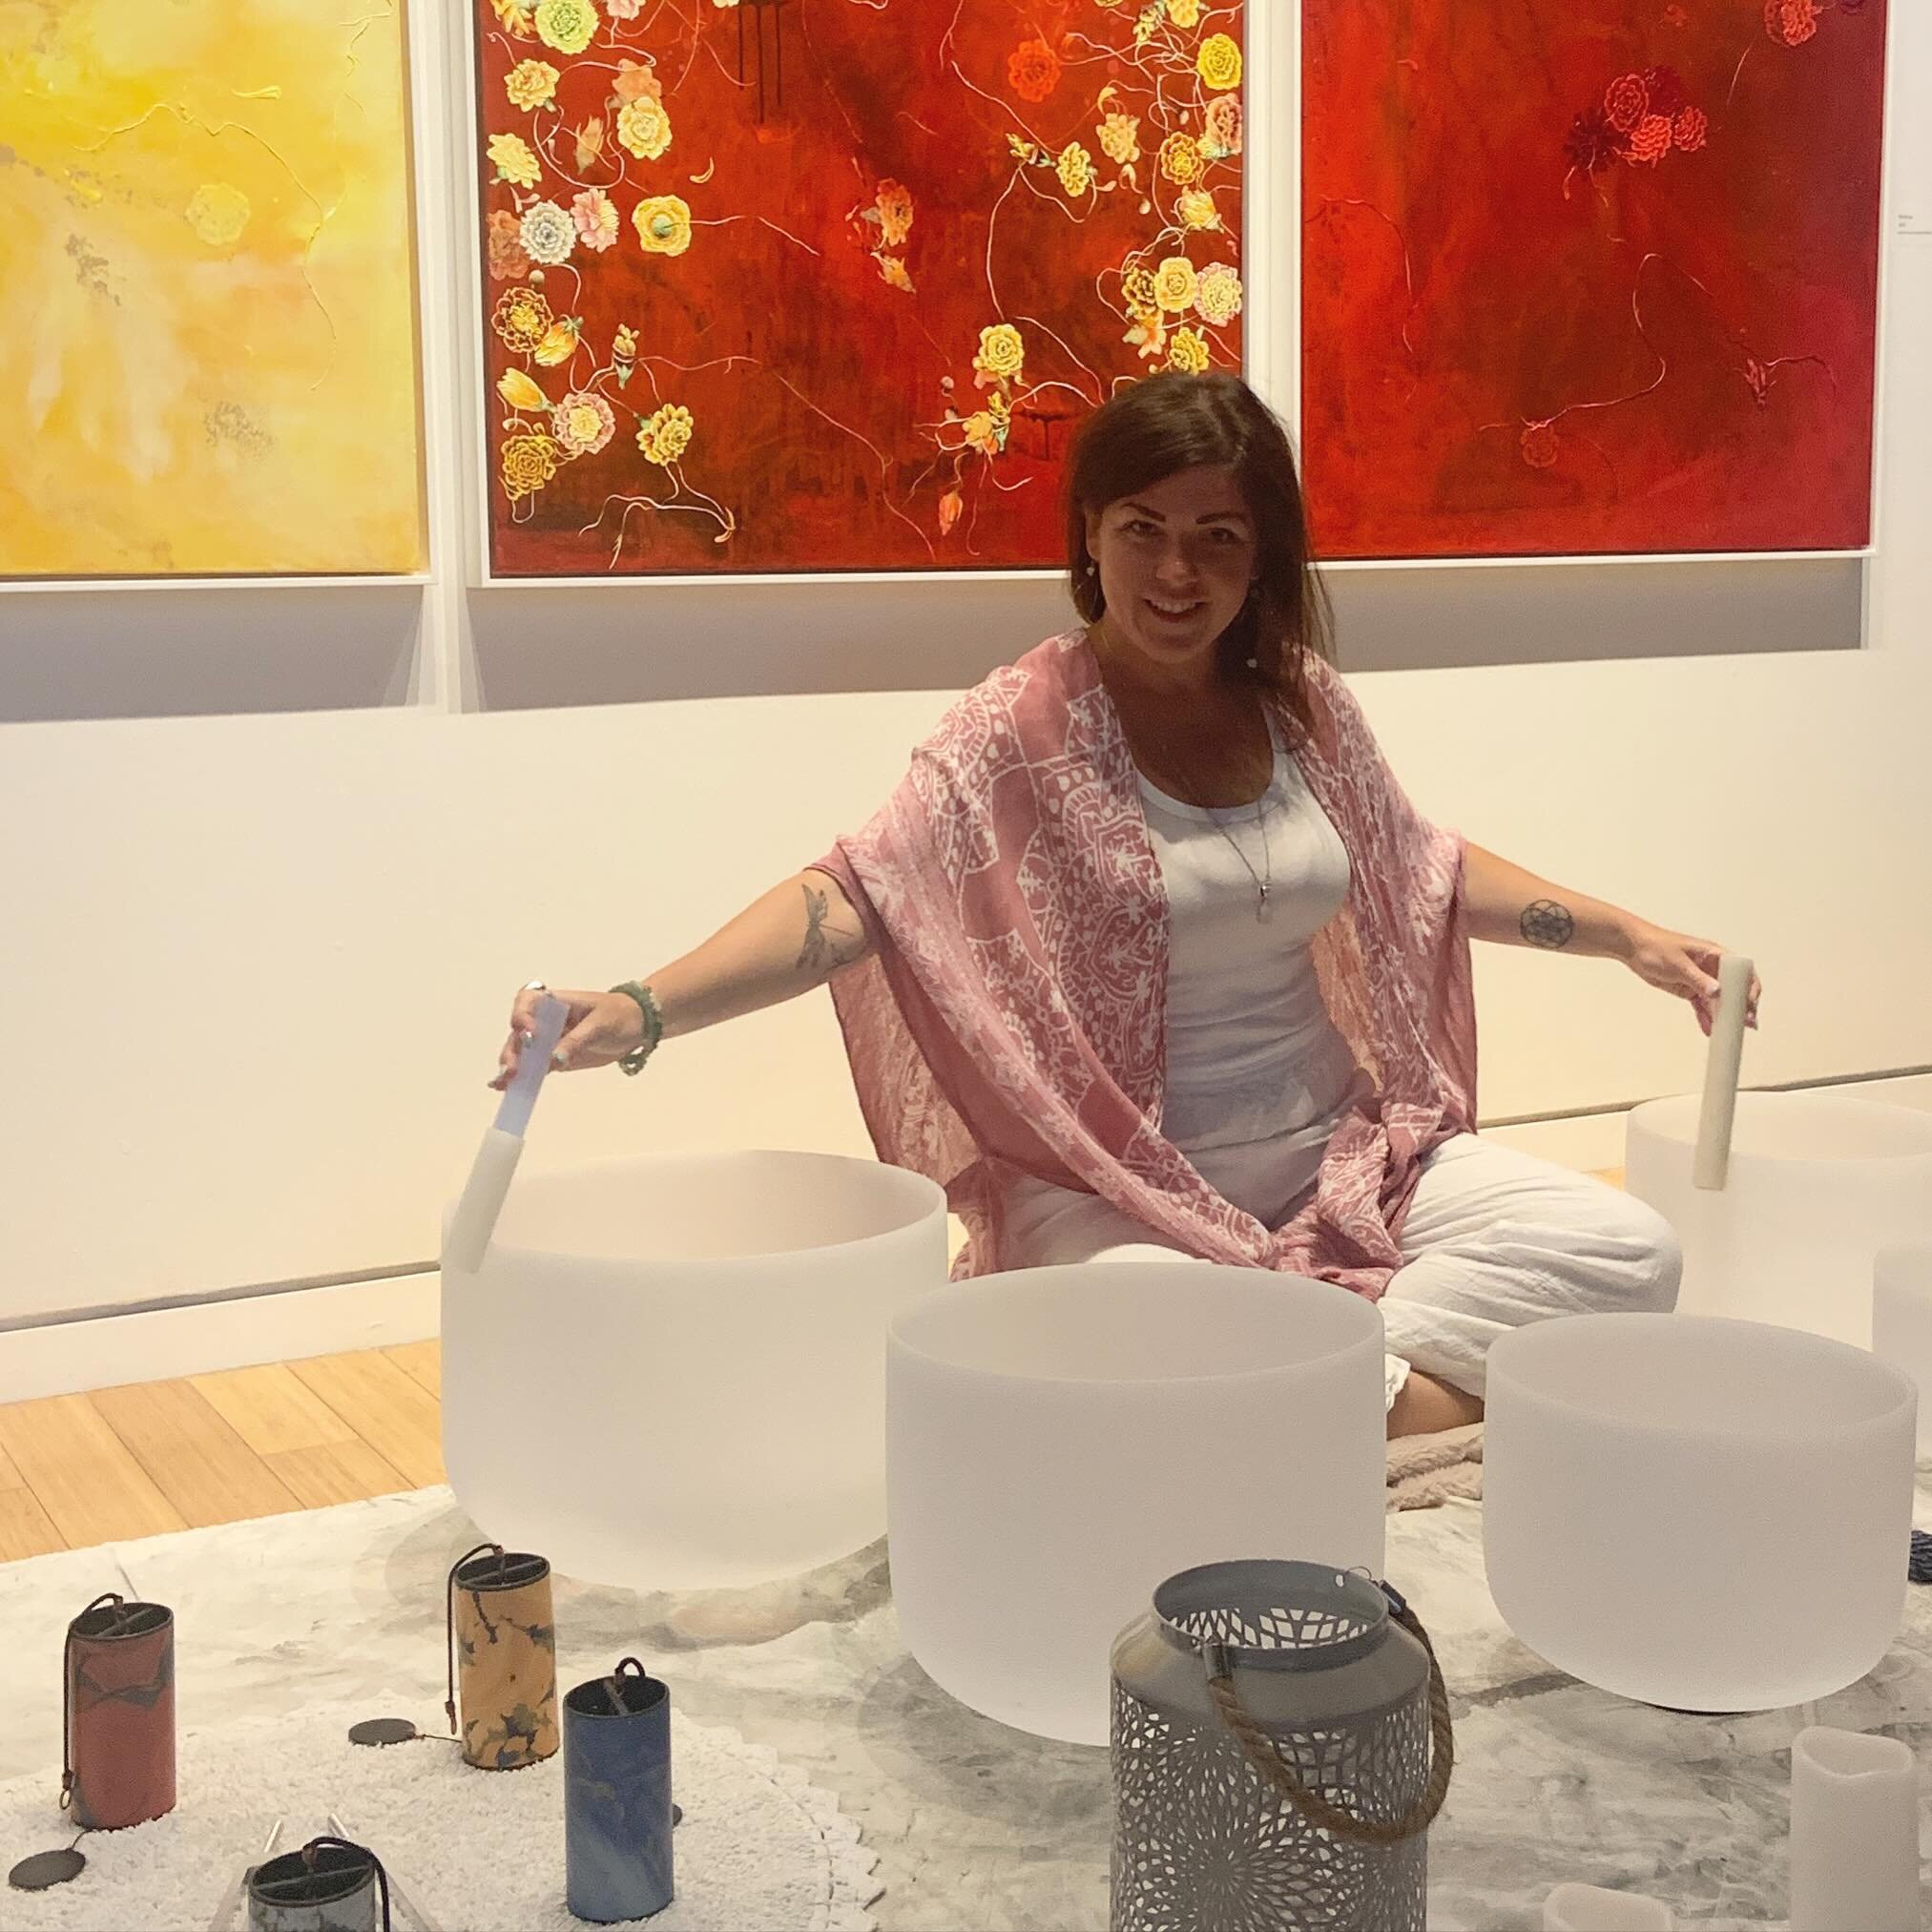 Join me @stationgallery for Gentle Flow + Rest Yoga this morning at 10:30am and then for 2 hours of meditative soundscapes at their Sampler Sunday event, 1:00 - 3:00pm, a free drop-in event to sample adult art programs! 

Come try out pottery, waterc